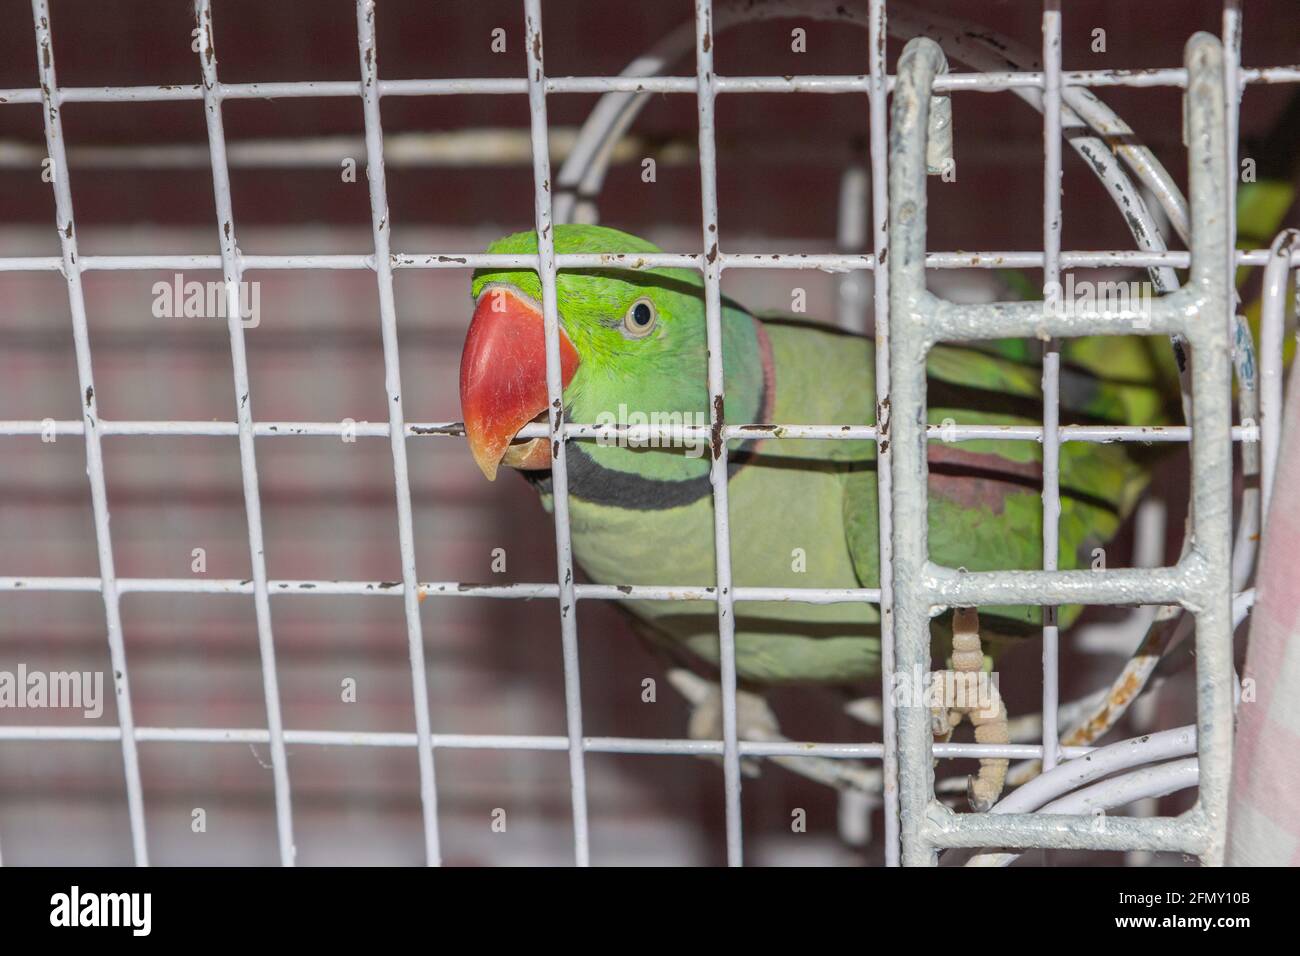 A caged green parrot biting the cage grills with its red beak to break free Stock Photo